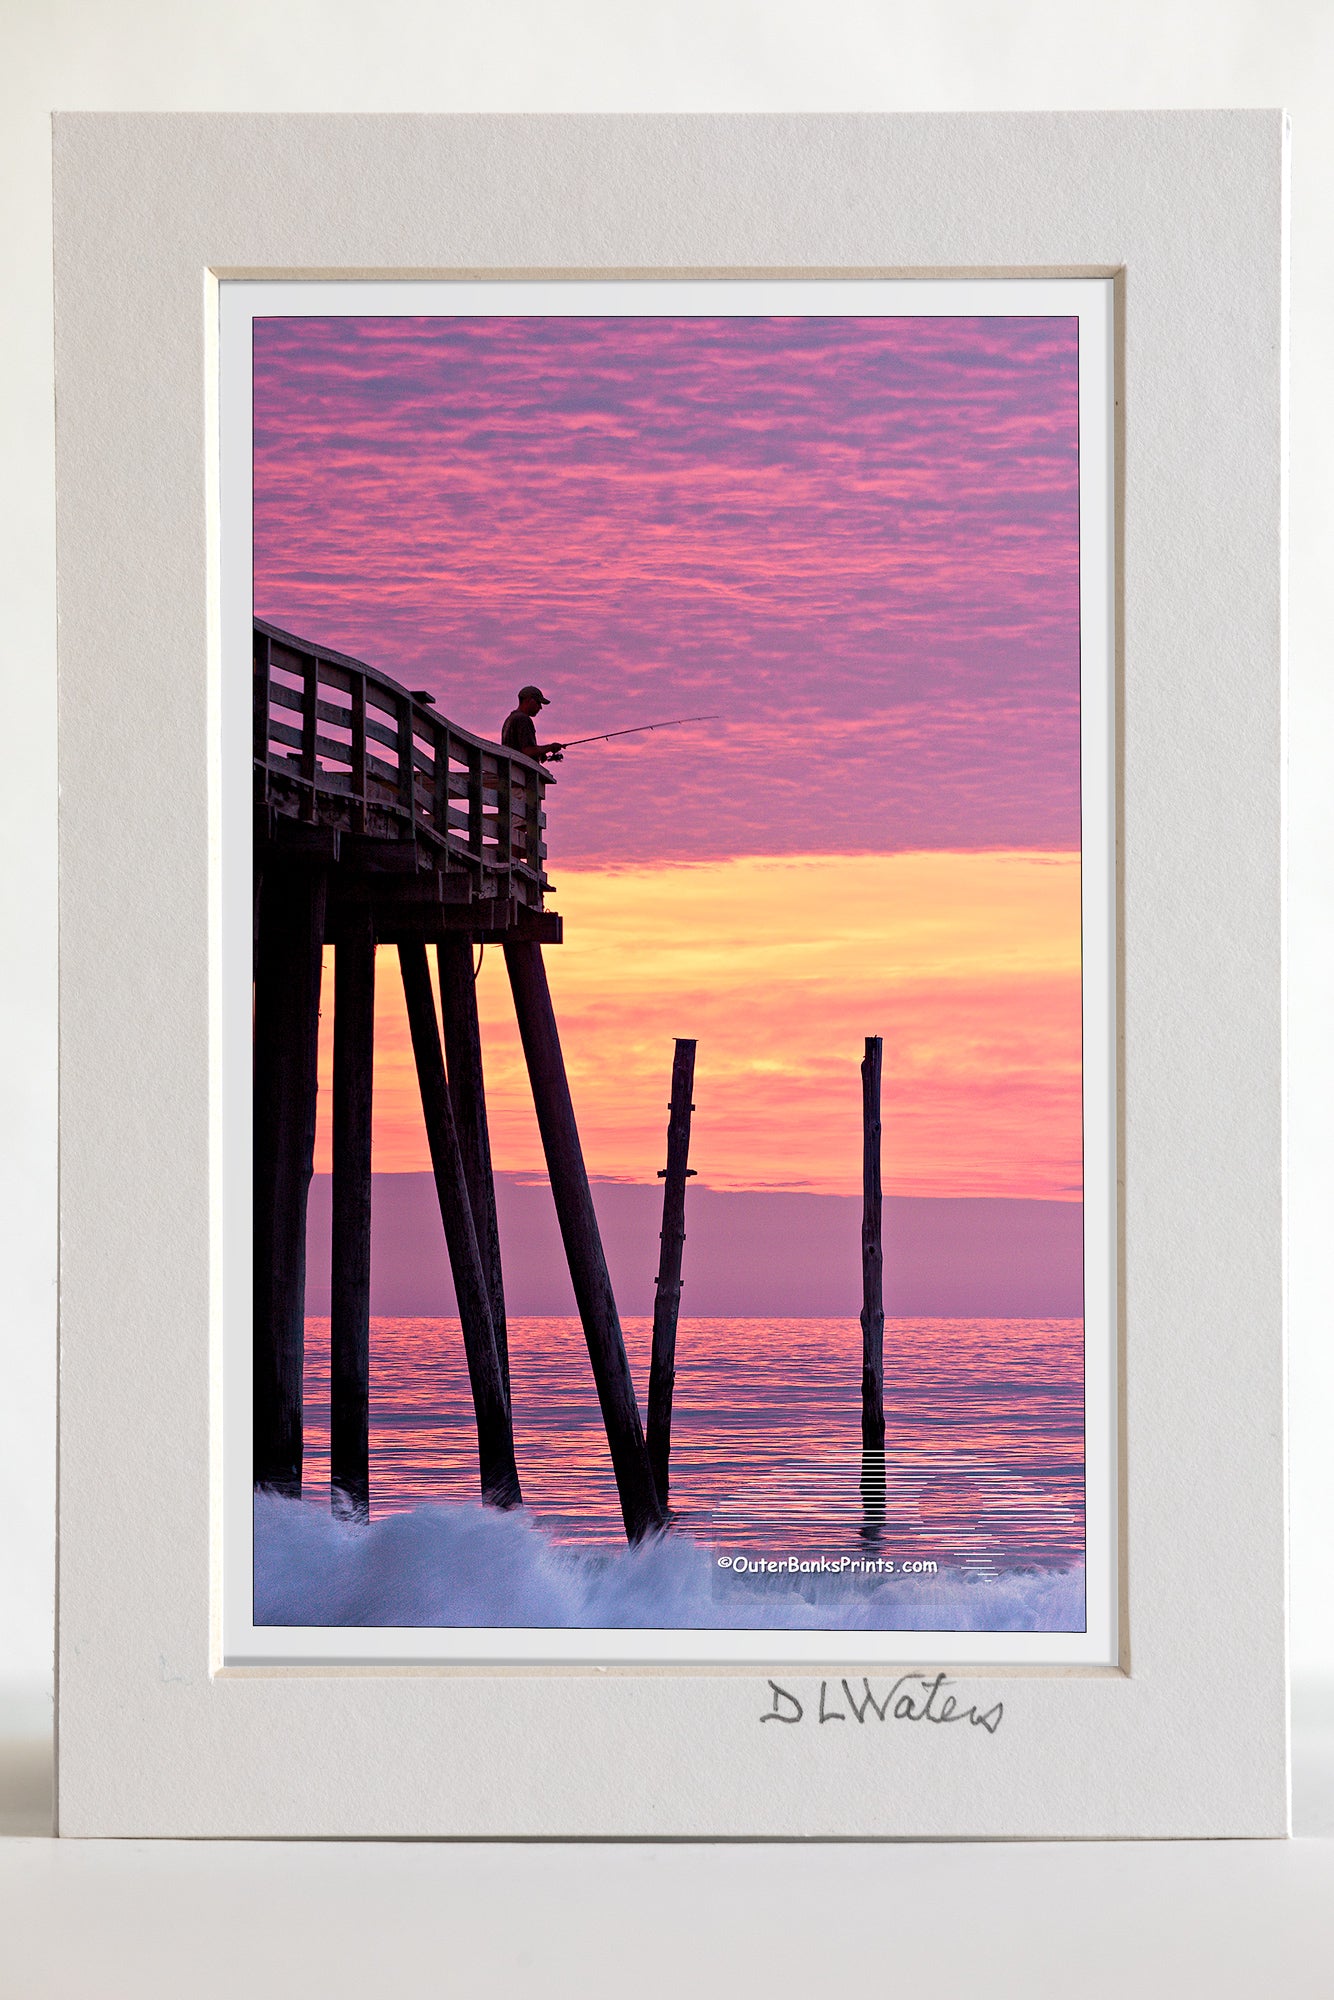 4 x 6 luster print in a 5 x 7 ivory mat of  A silhouette of an incredible sunrise at Kitty Hawk pier.